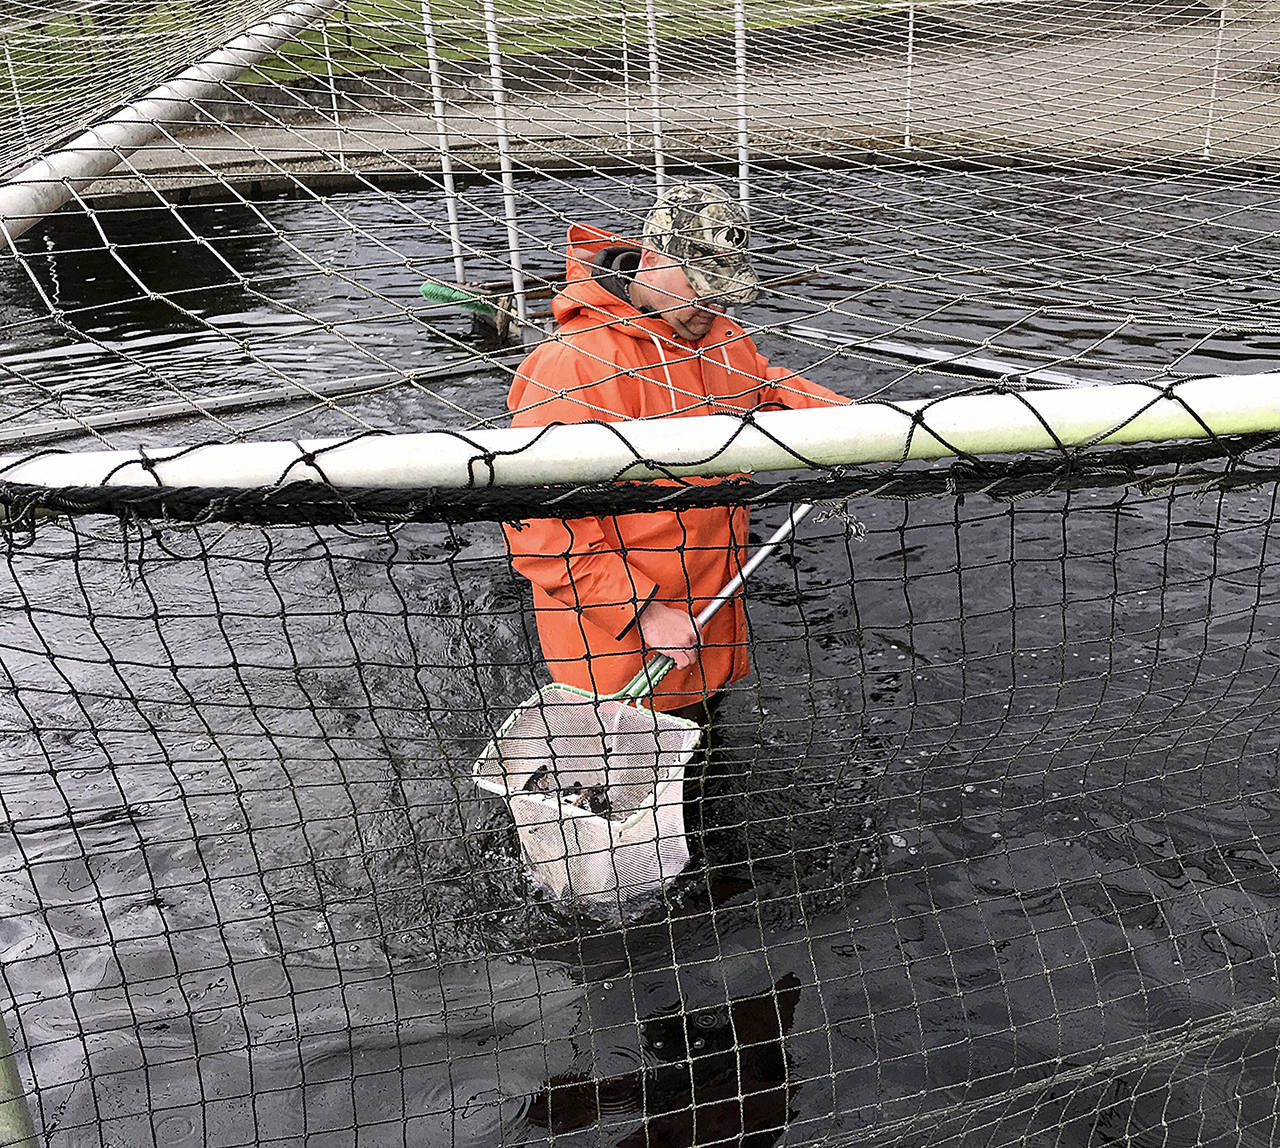 Fisheries biologist Andrew Fowler nets some fish at an Arlington hatchery so they can be marked by volunteers. (Mike Benbow)